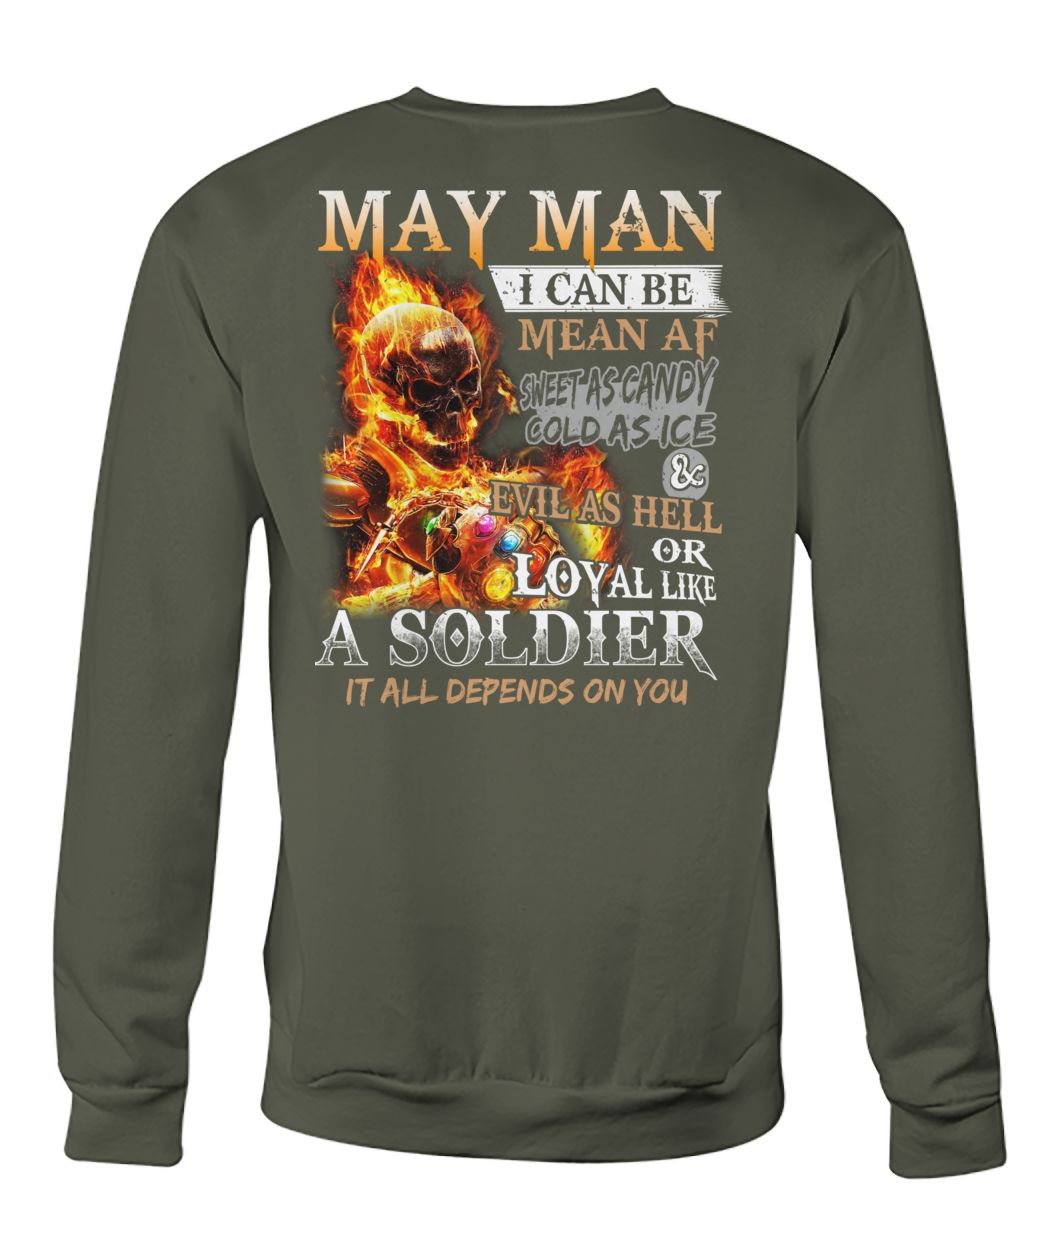 May man I can be mean af sweet as candy gold as ice and evil as hell crew neck sweatshirt